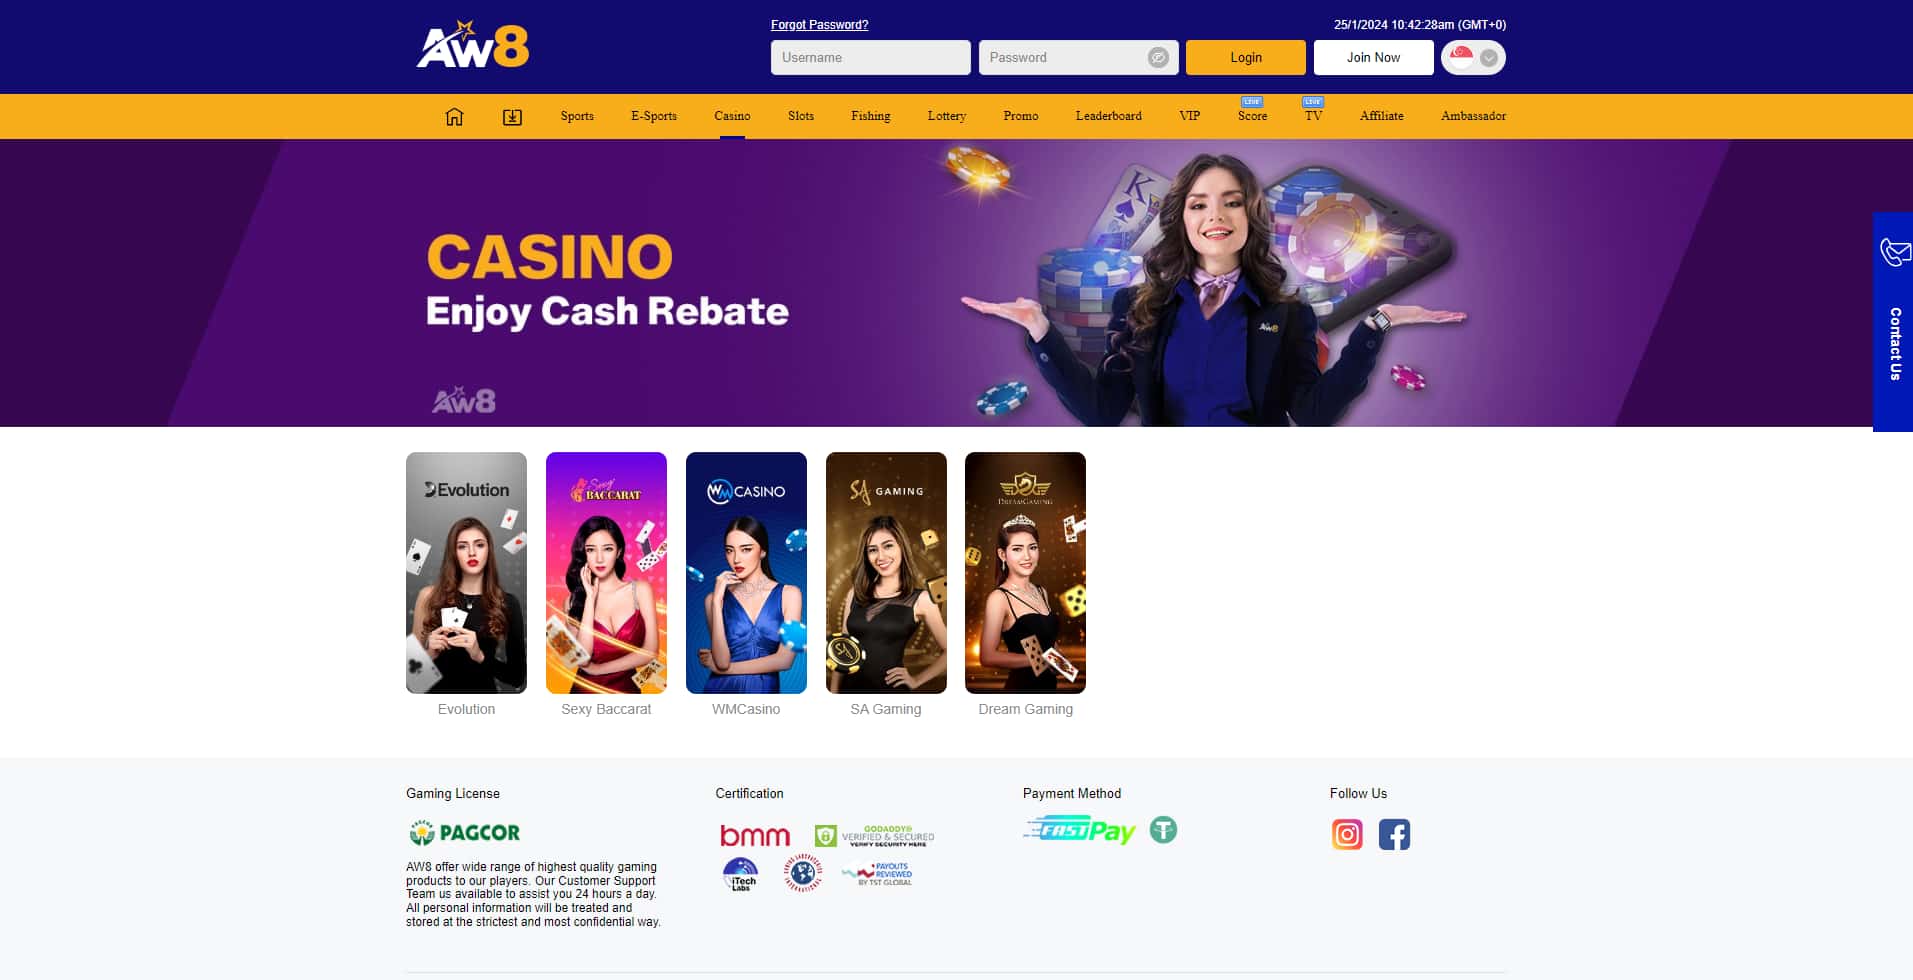 AW8 live casino gaming options